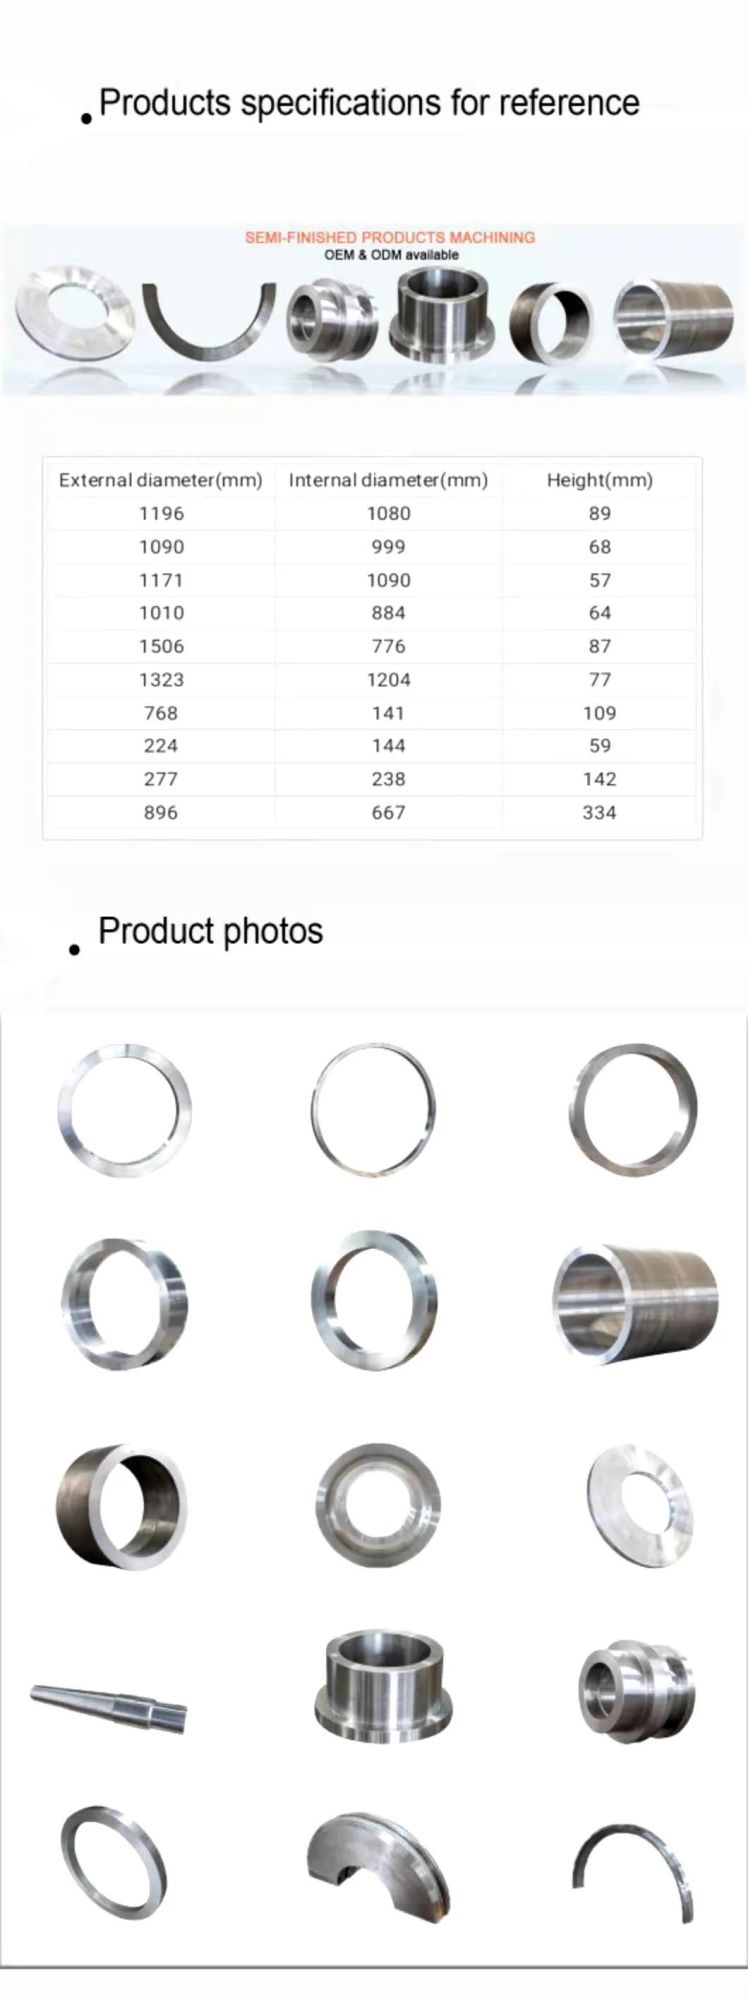 Stainless Steel Ring, Flange, Ring Forging Blank and Shipbuilding Industries